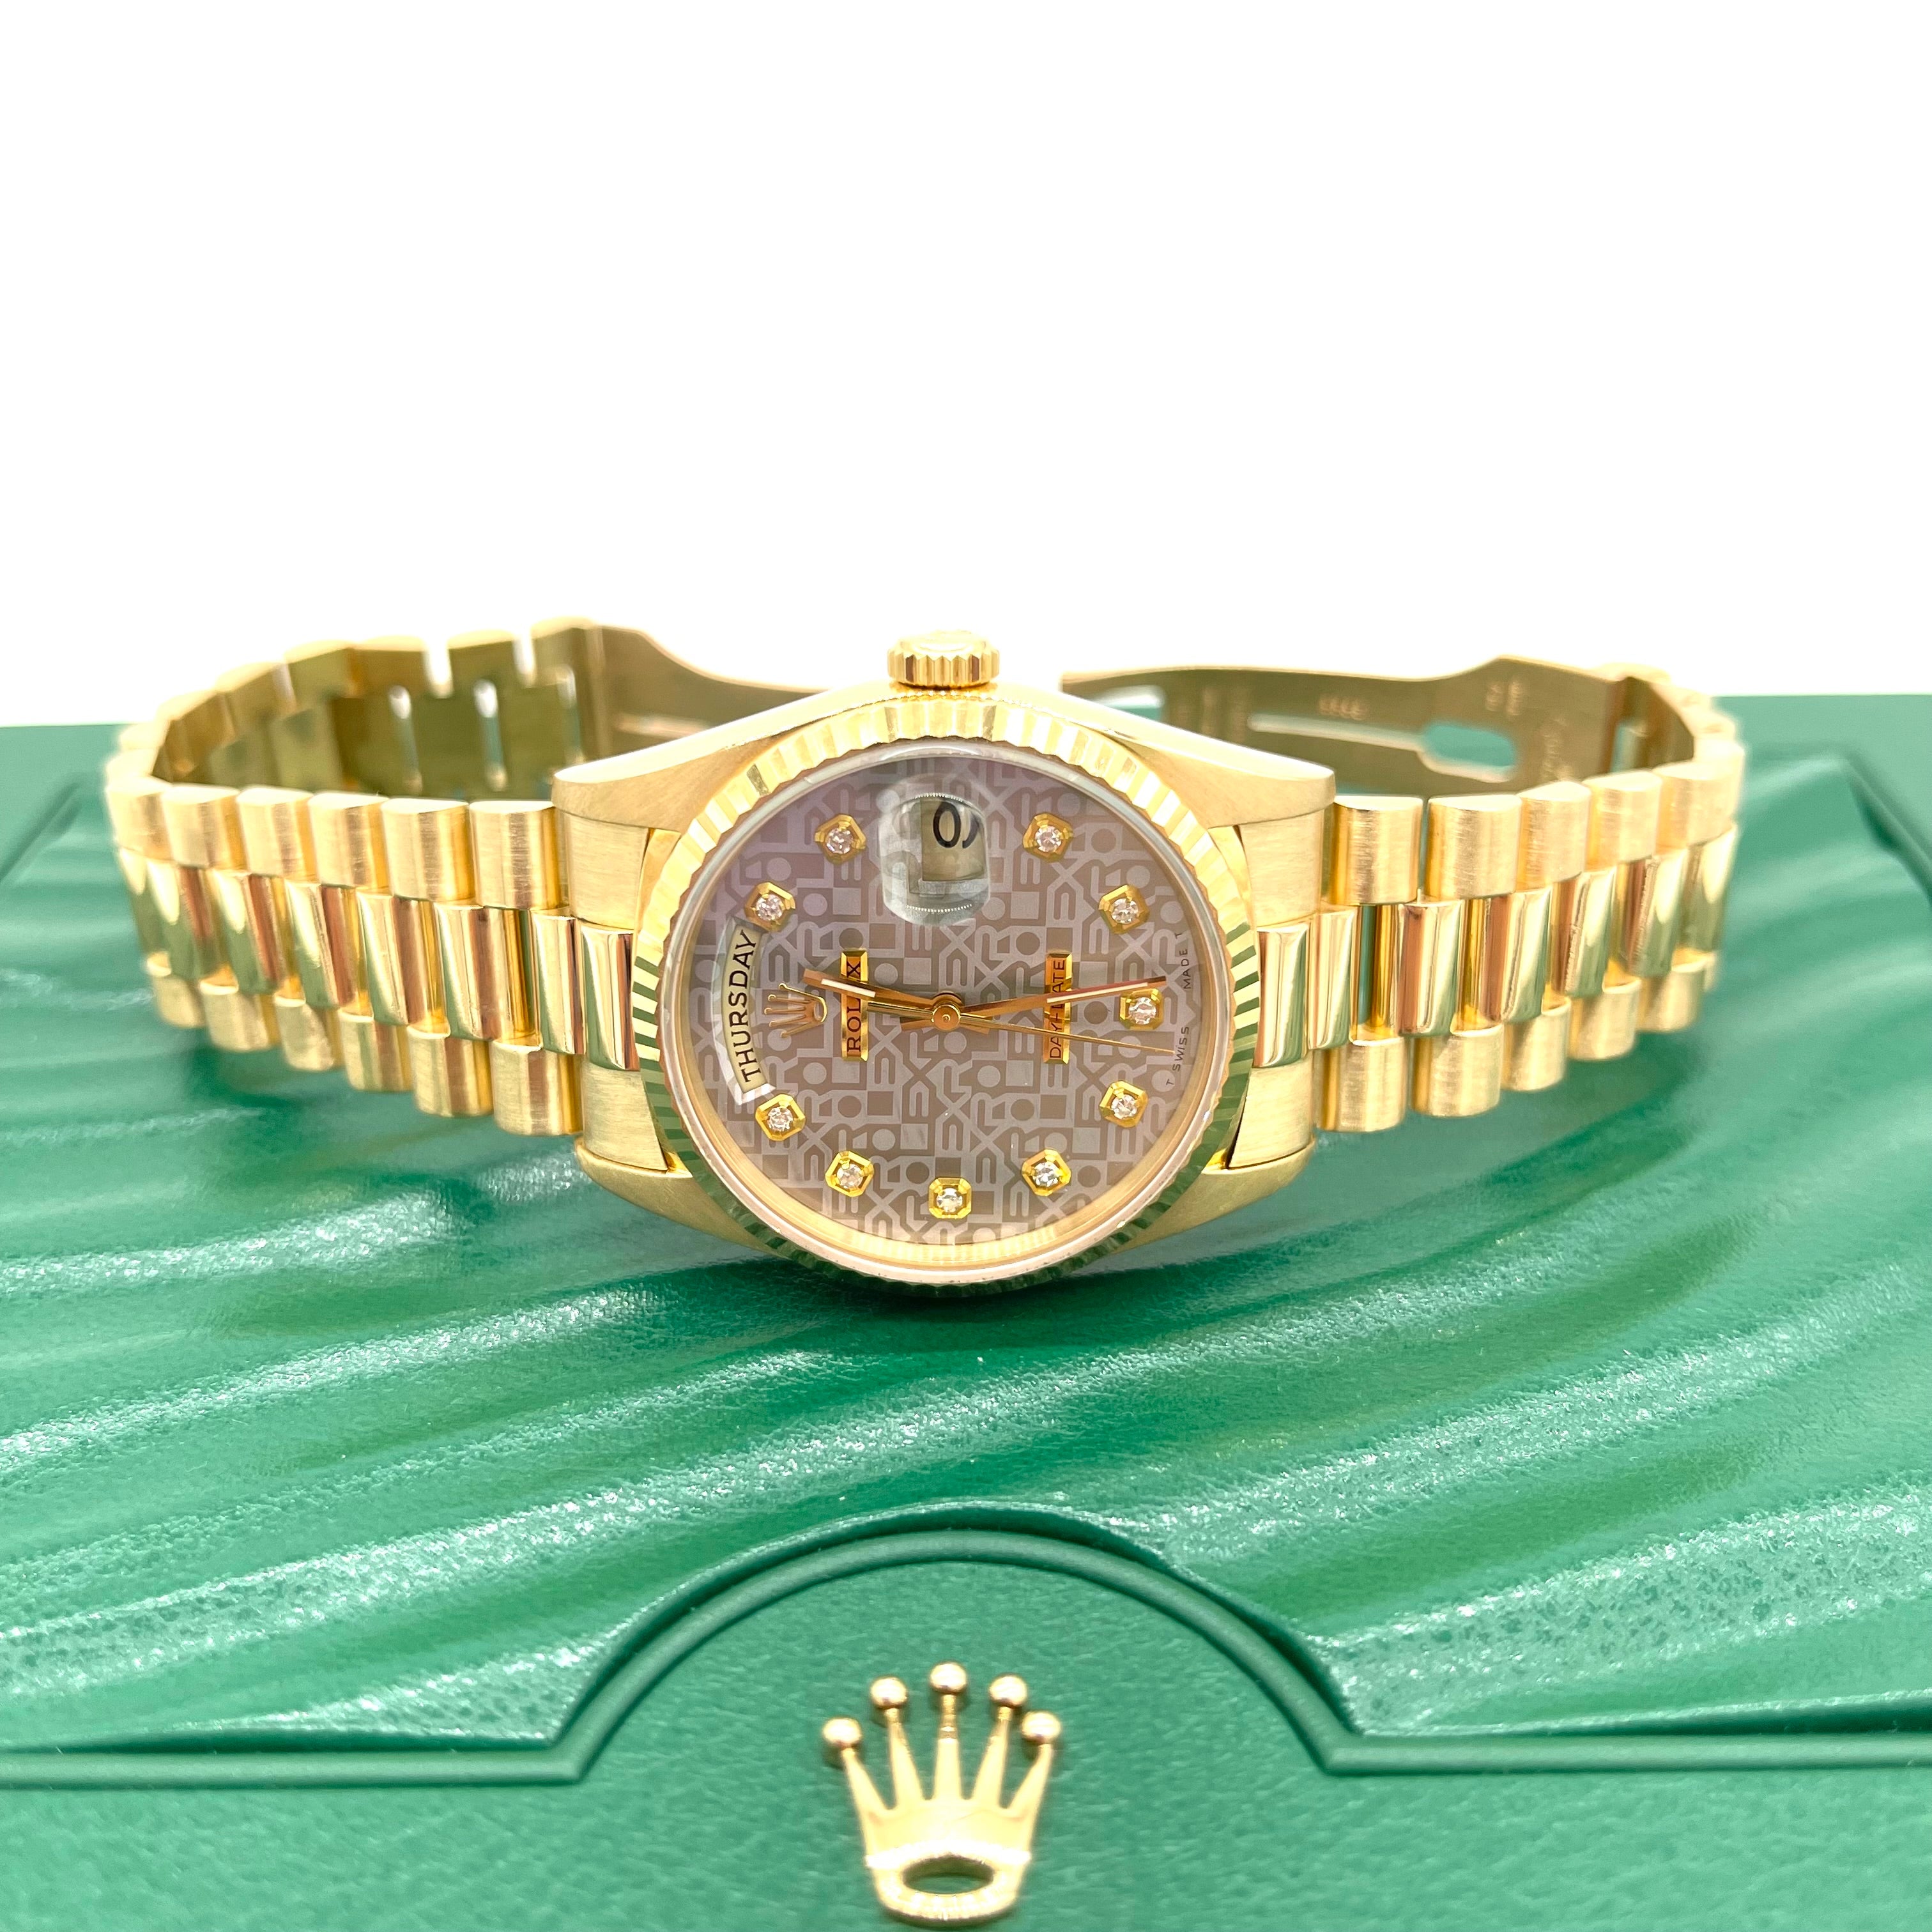 ROLEX | DAY-DATE PRESIDENT 36MM SUPER JUBILEE DIAMOND DIAL 1990 ORIGINAL FINISH• Reference#: 18238 • Serial#:T6239**